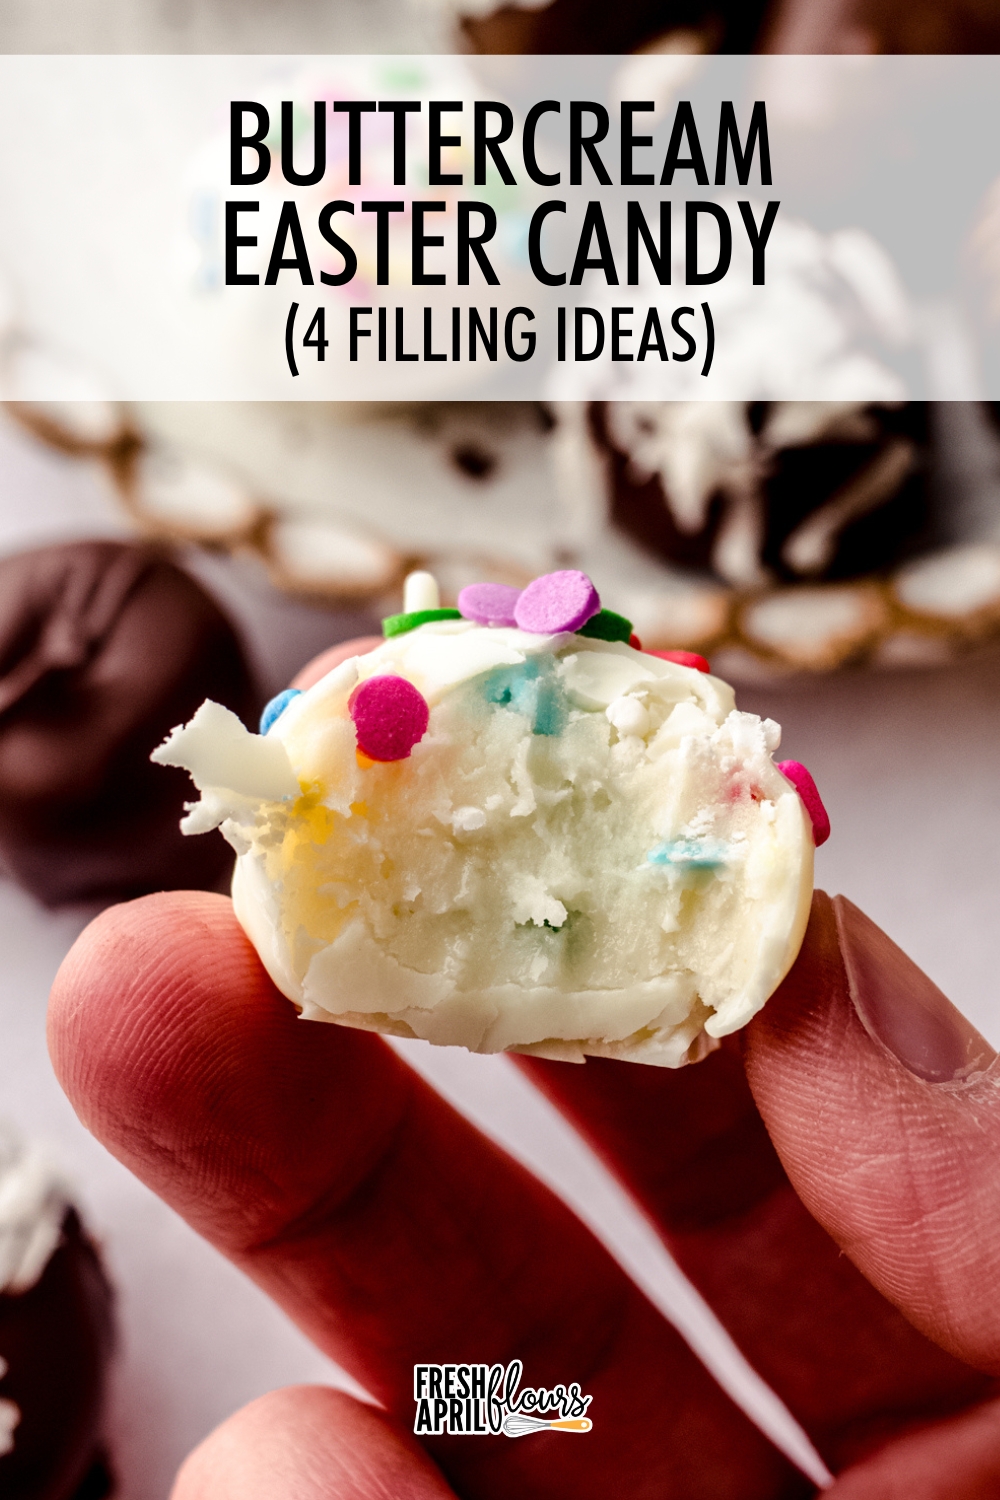 Let me teach you how to make your own Easter egg buttercream candies. This recipe includes variations for classic vanilla buttercream filling as well as funfetti buttercream filling, coconut buttercream filling, and peanut butter filling. via @frshaprilflours